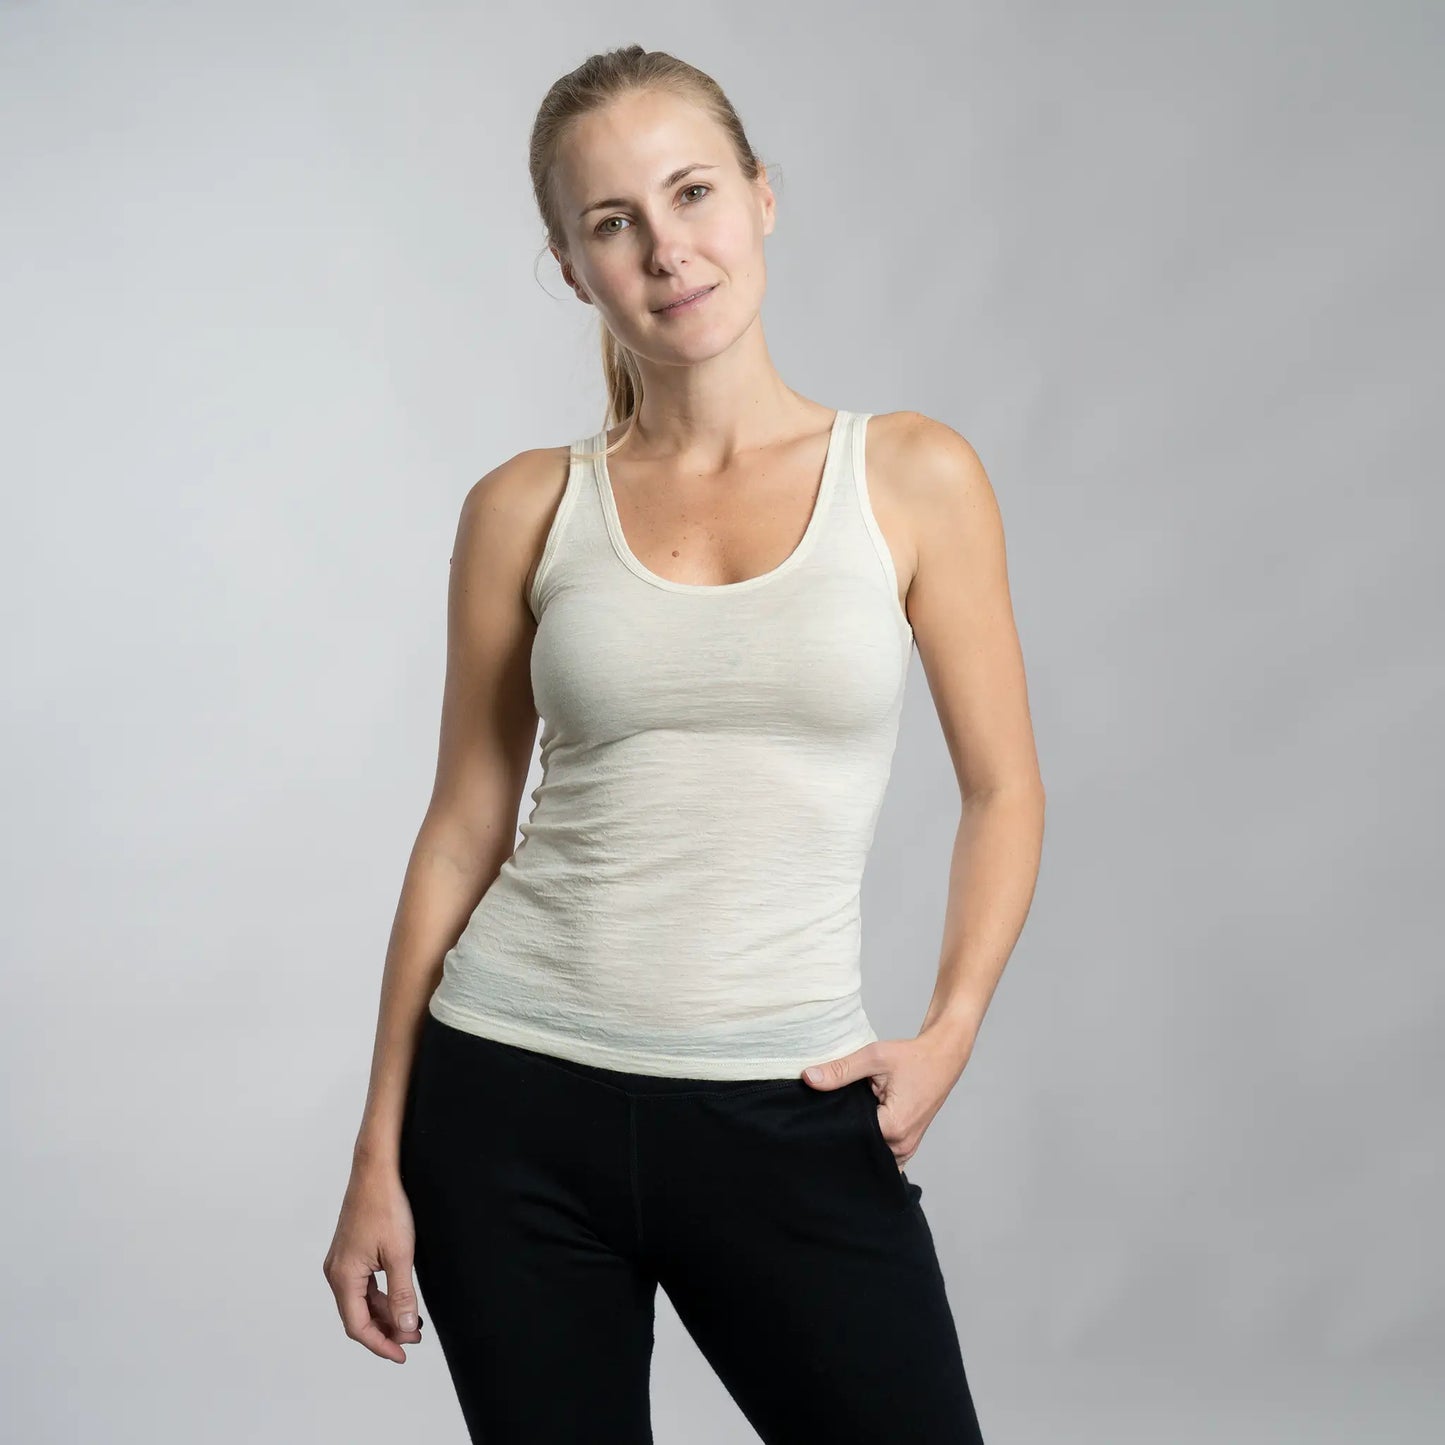 womens comfortable fit tank top ultralight color natural white